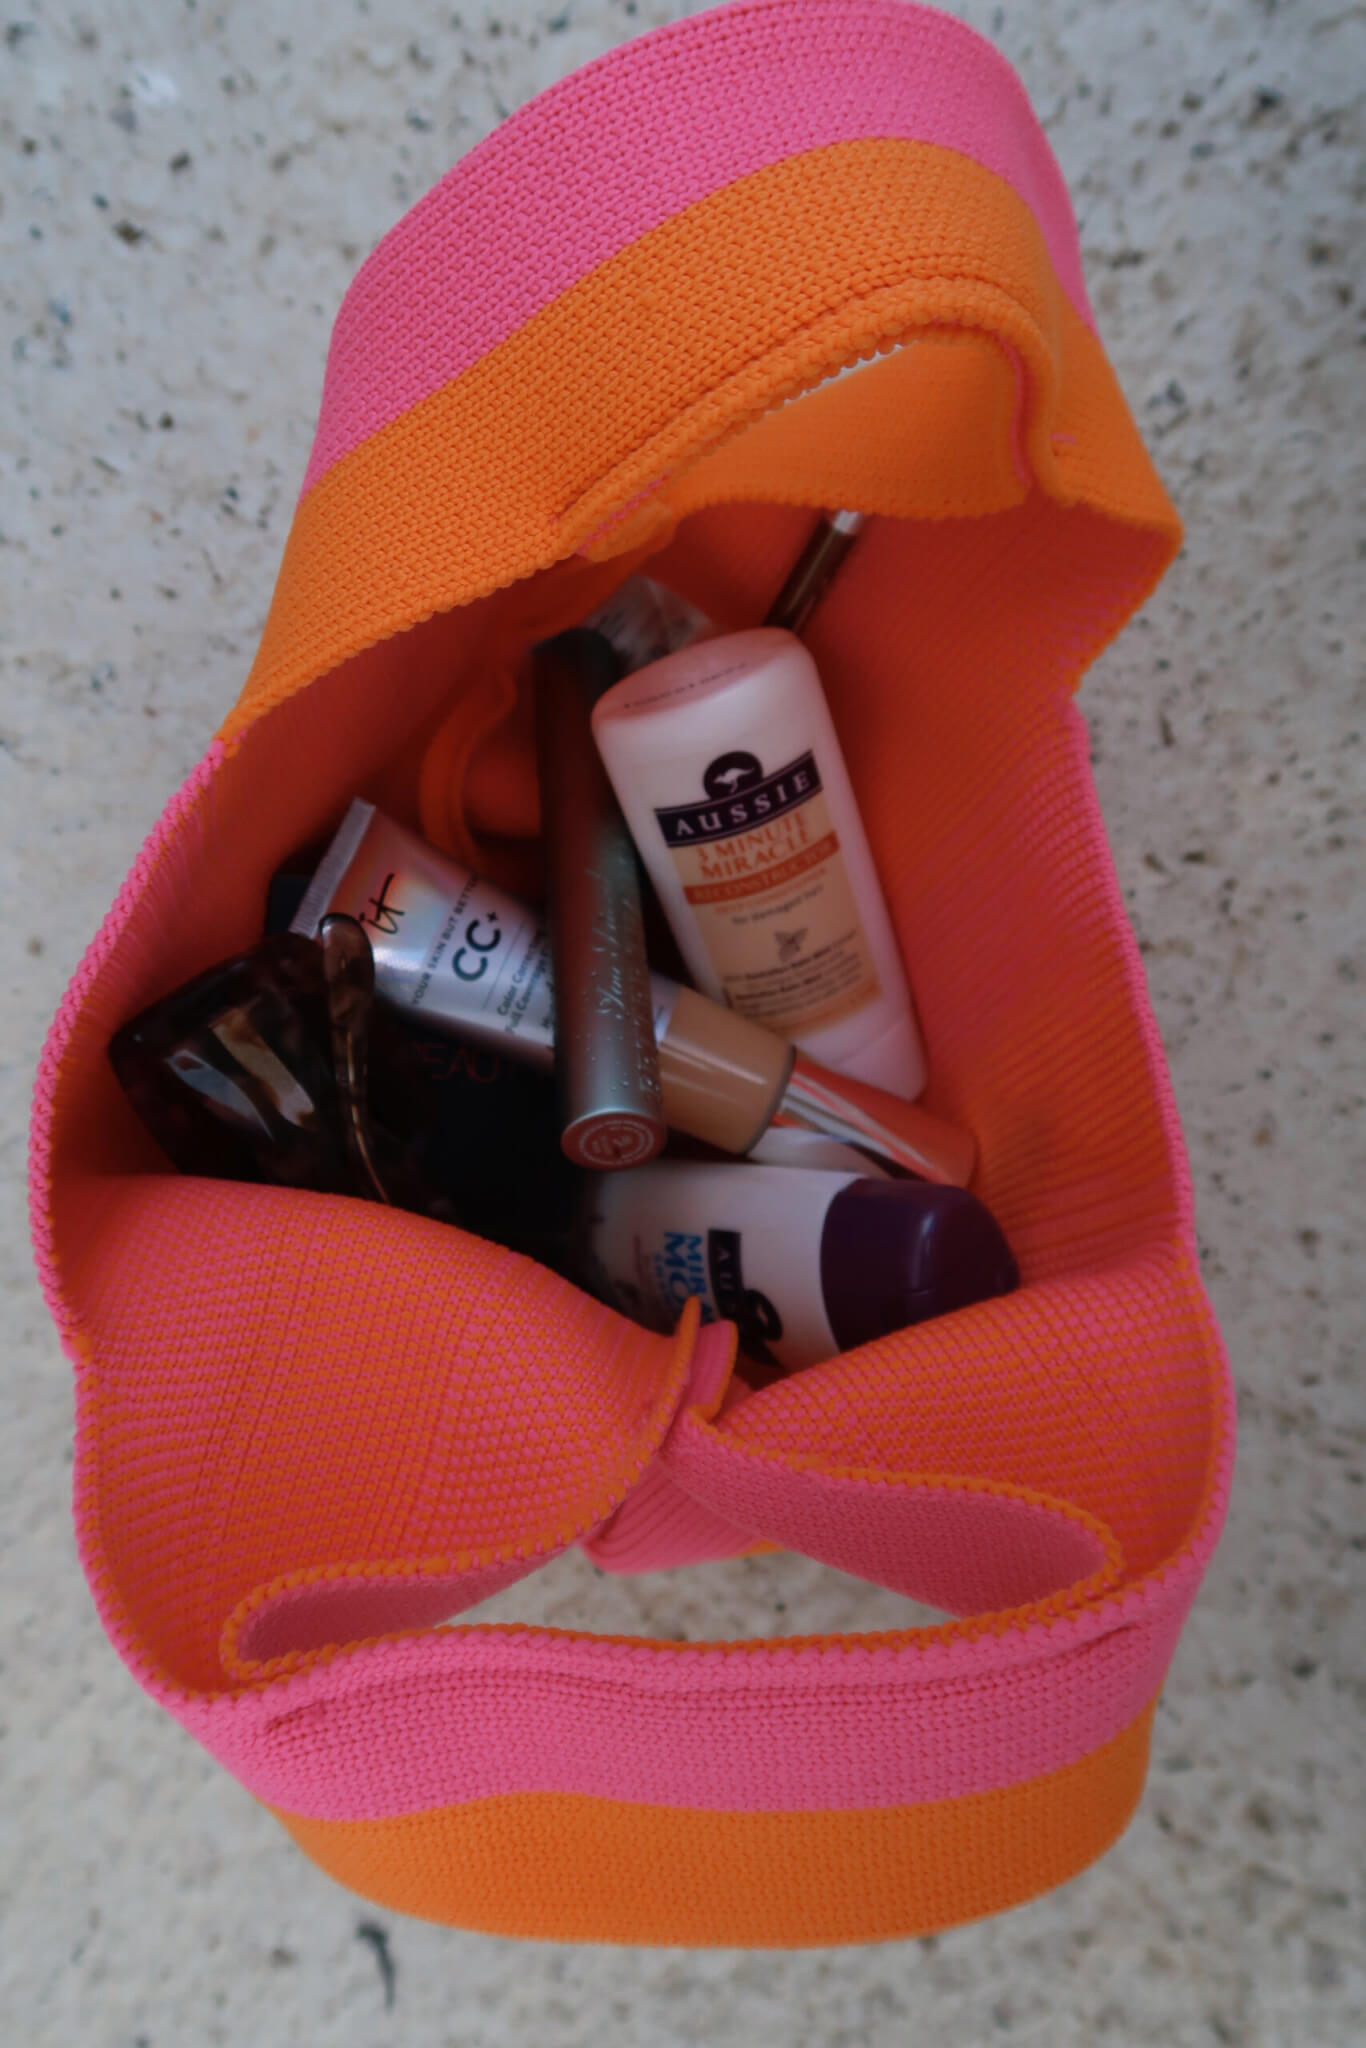 Tezza-2891-scaled Summer Travel Essentials: What's in My Holiday Bag